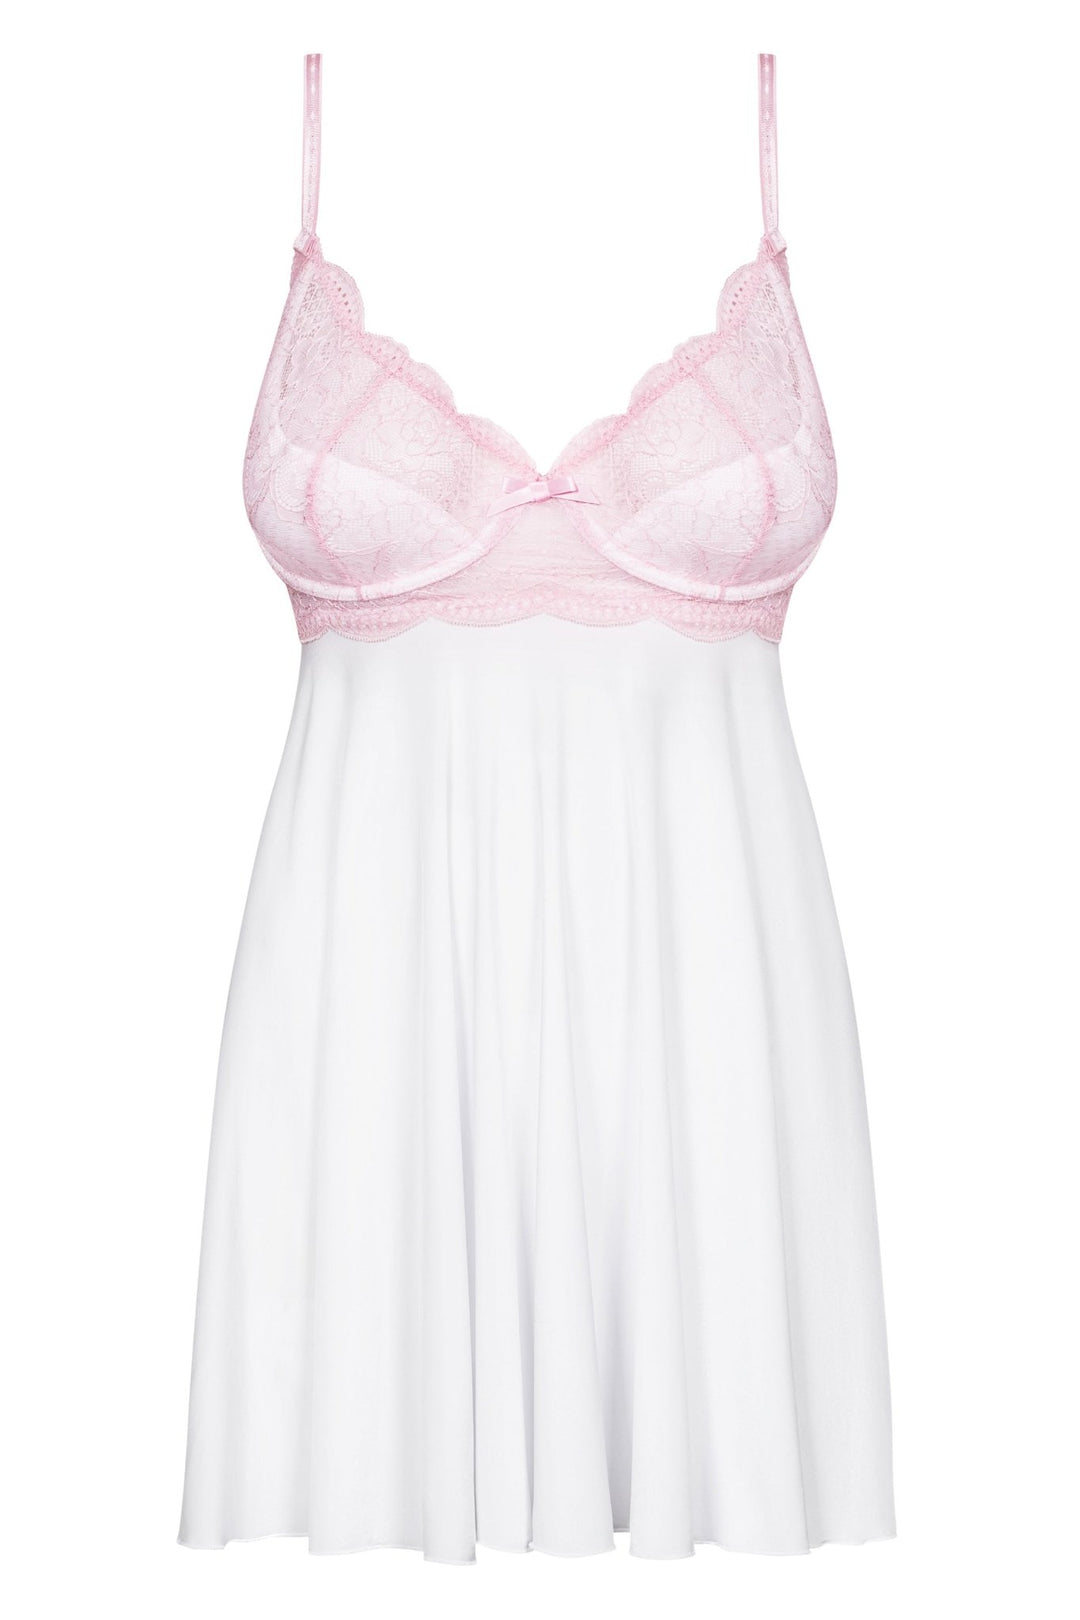 pink and white bridal lingerie